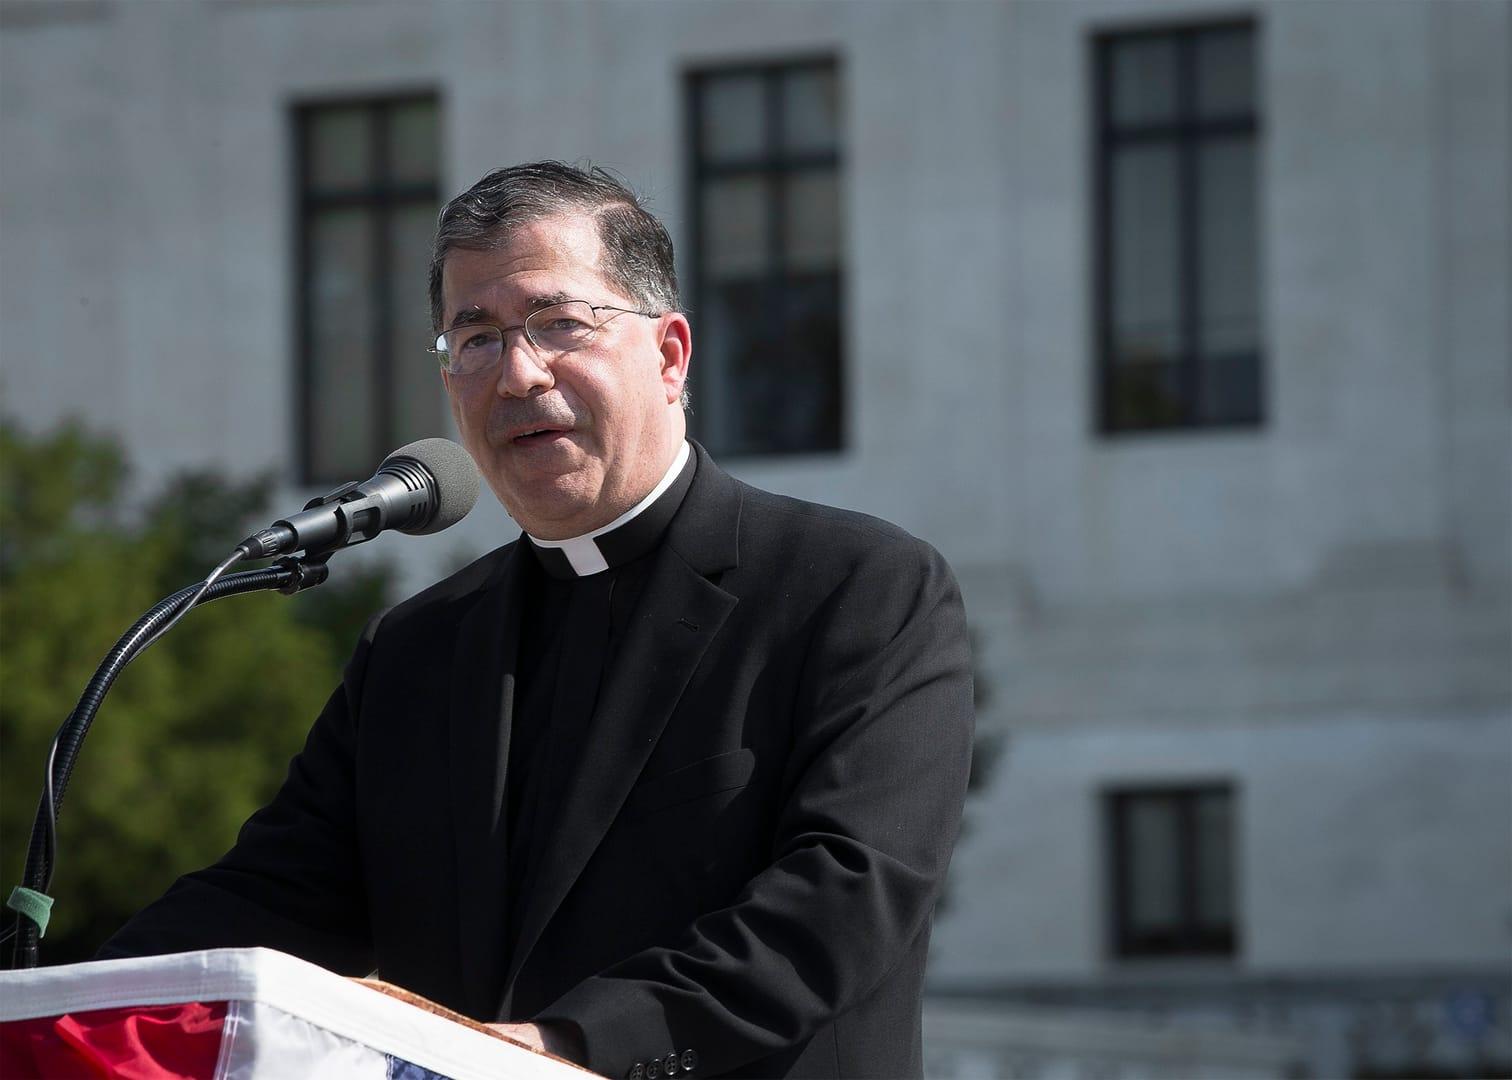 Rome university to honor controversial priest’s pro-life work